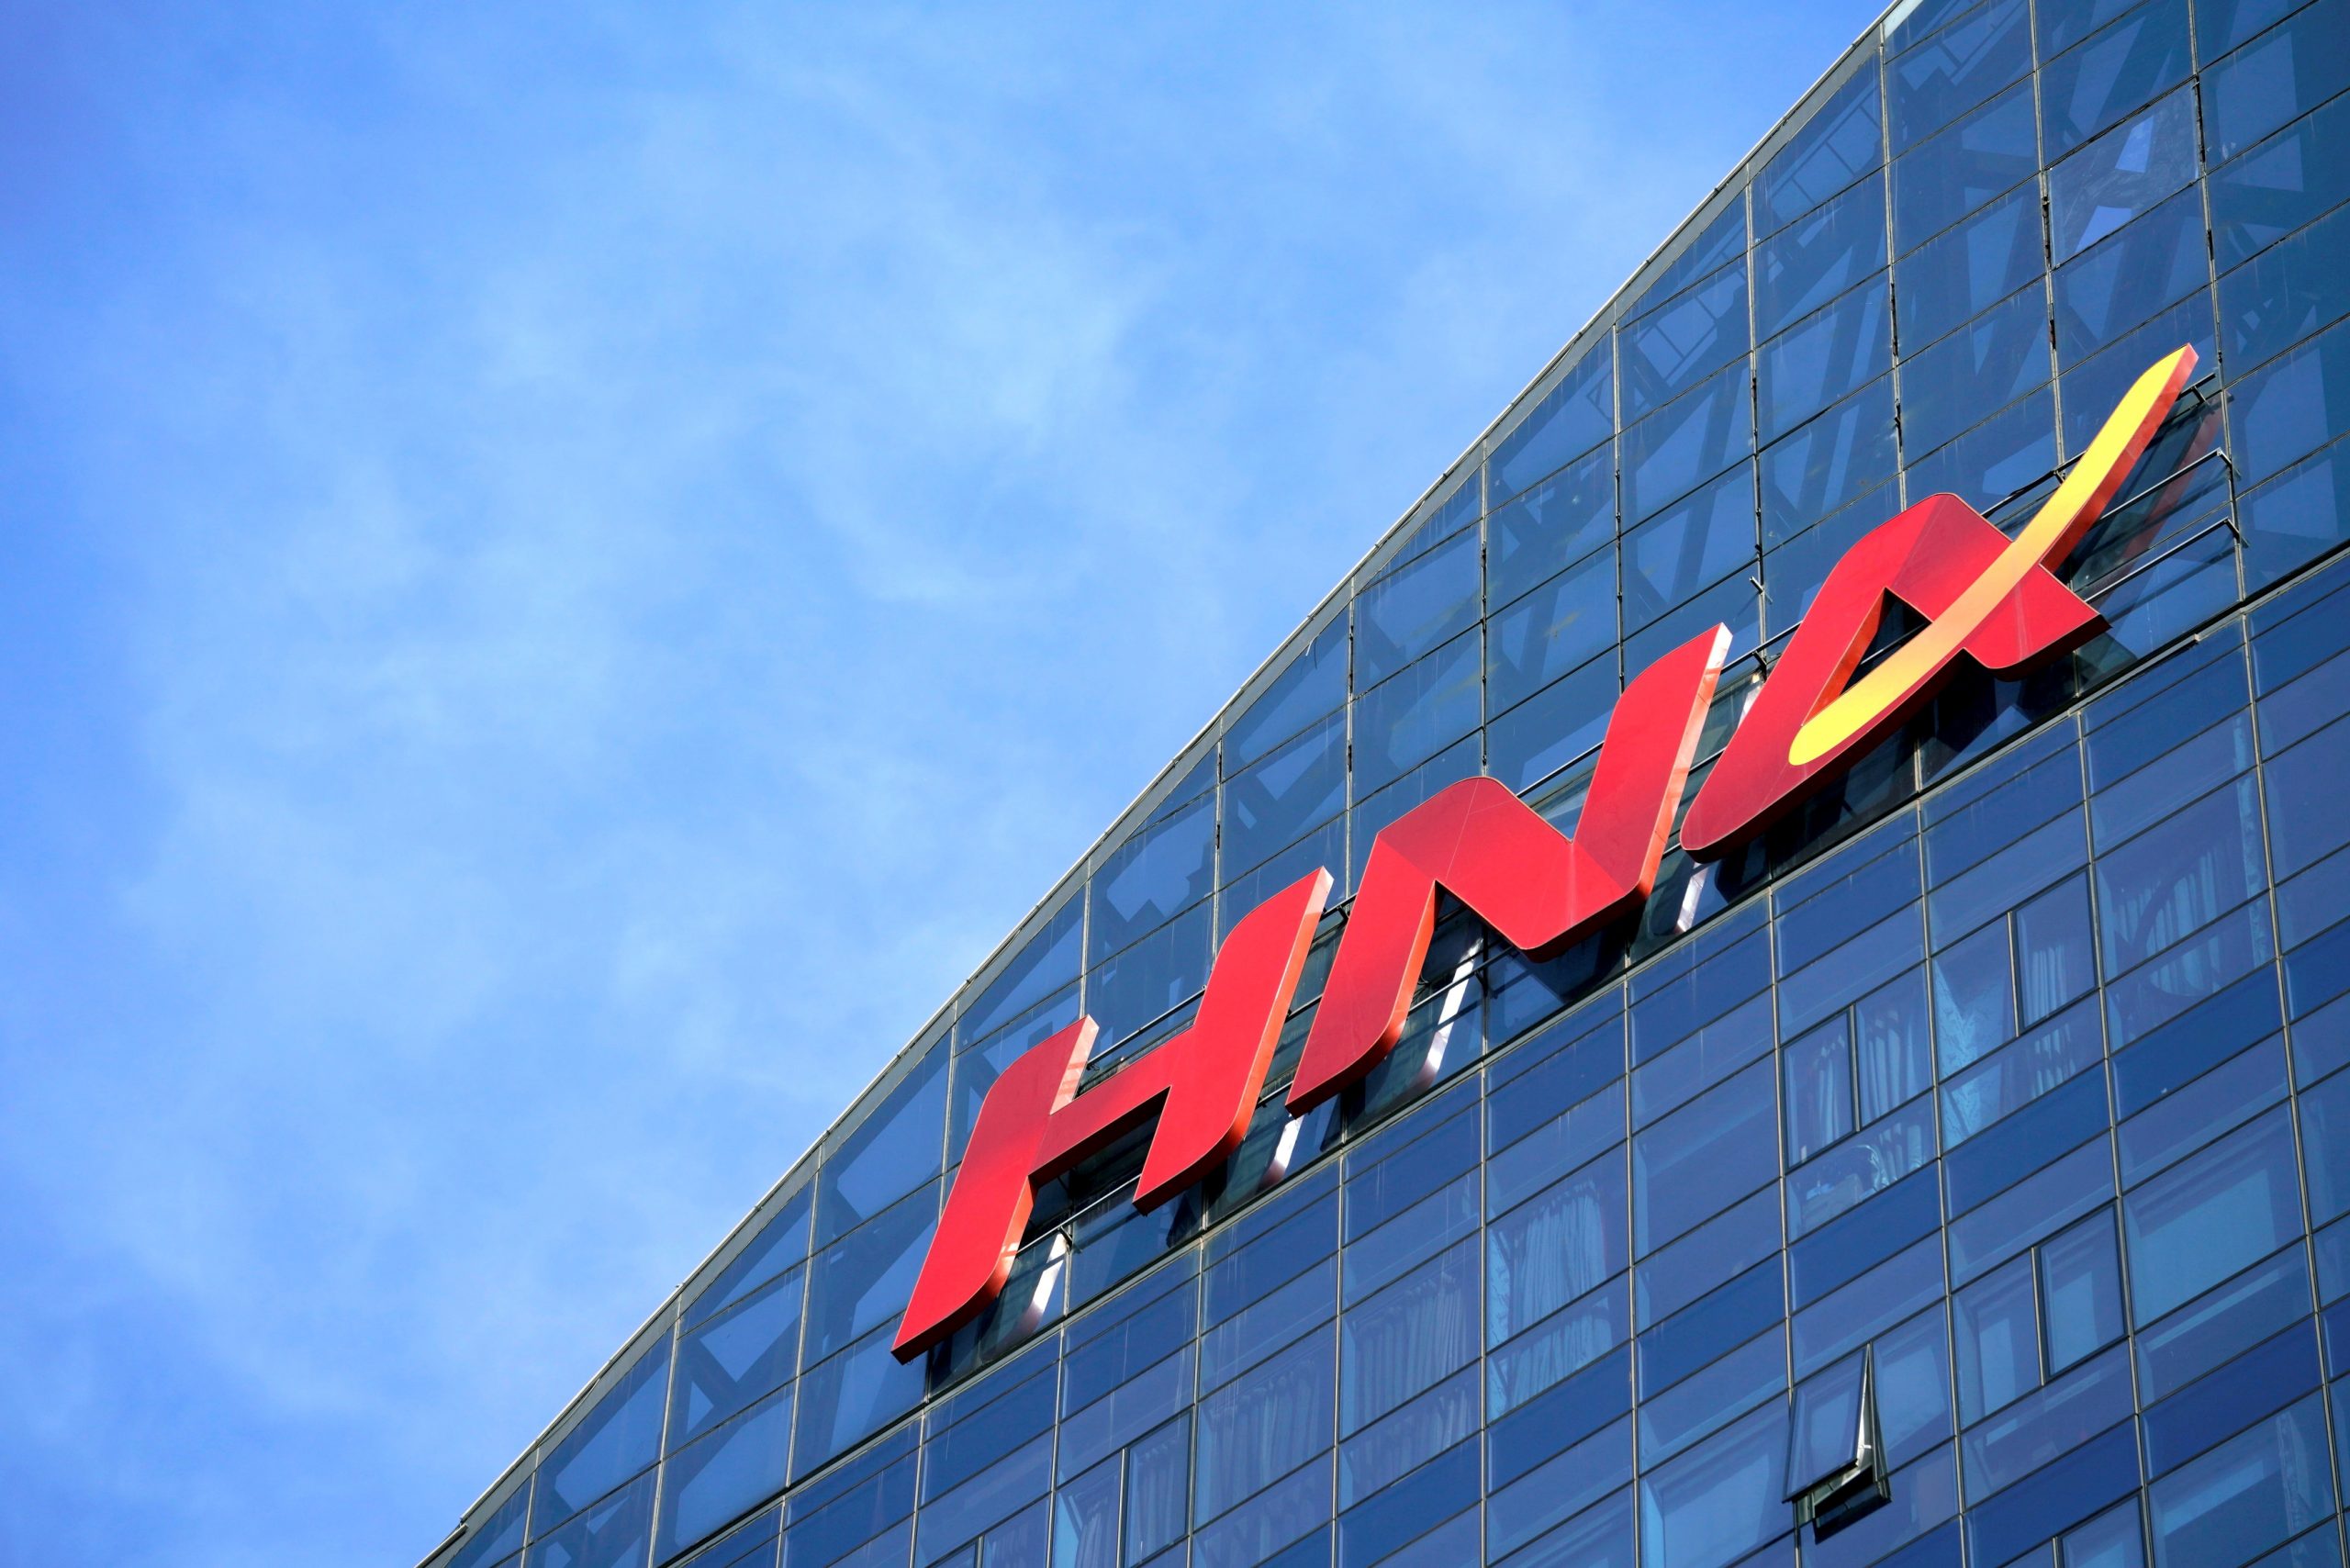 China’s Troubled HNA Said To Get $5.9bn in Strategic Investment